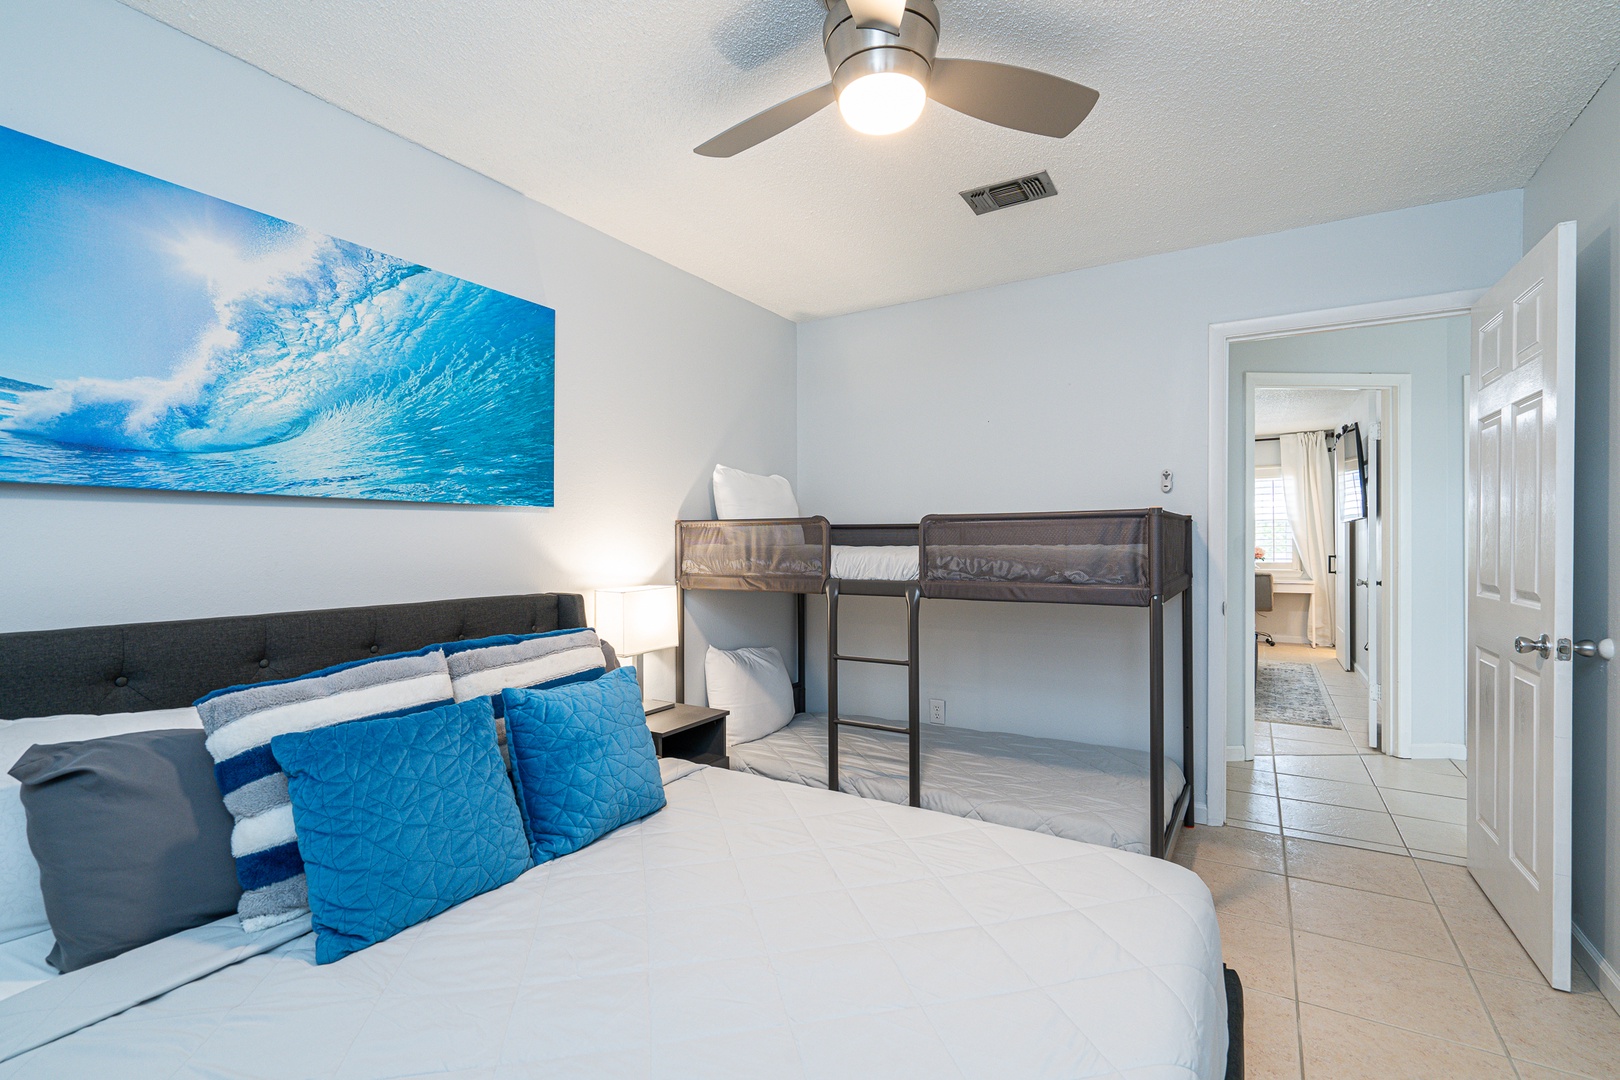 The 2nd bedroom showcases a queen-sized bed, twin bunkbed, & Smart TV